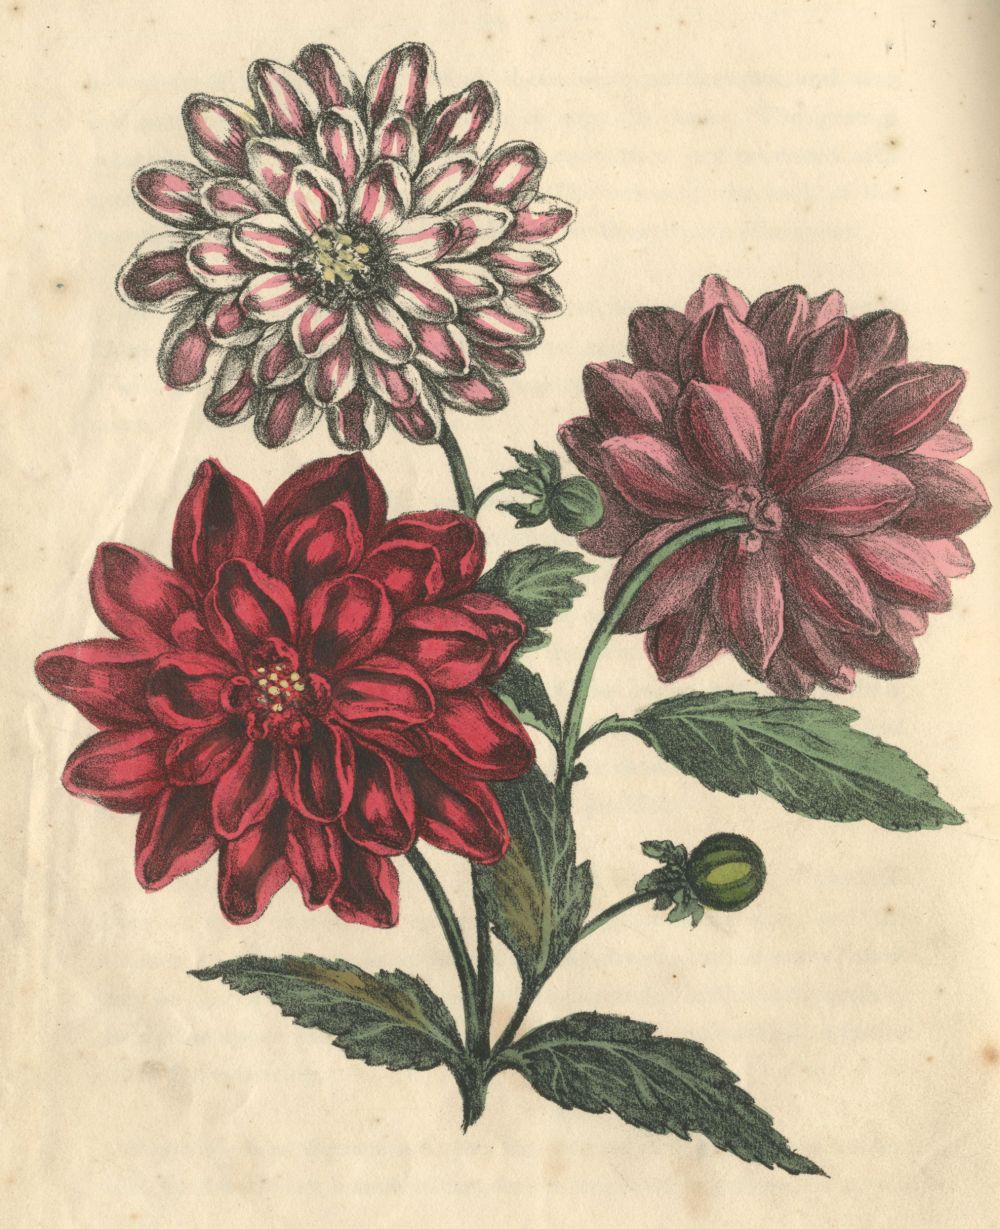 WHITTOCK (NATHANIEL) The Art of Drawing and Colouring from Nature, Flowers, Fruit and Shells... A...